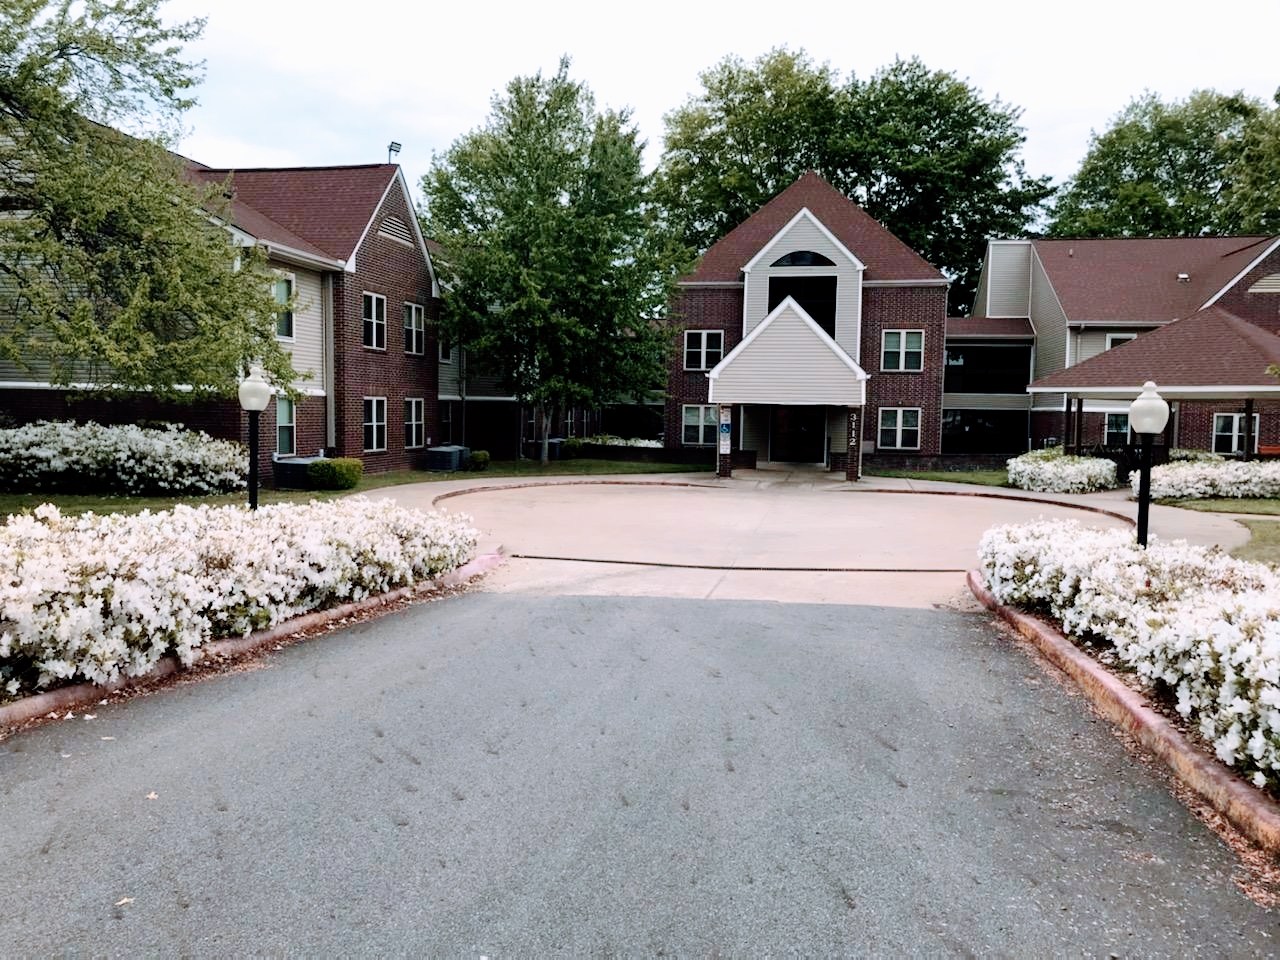 Photo of INGLEWOOD MANOR APARTMENTS. Affordable housing located at 3112 W 2ND CT RUSSELLVILLE, AR 72801